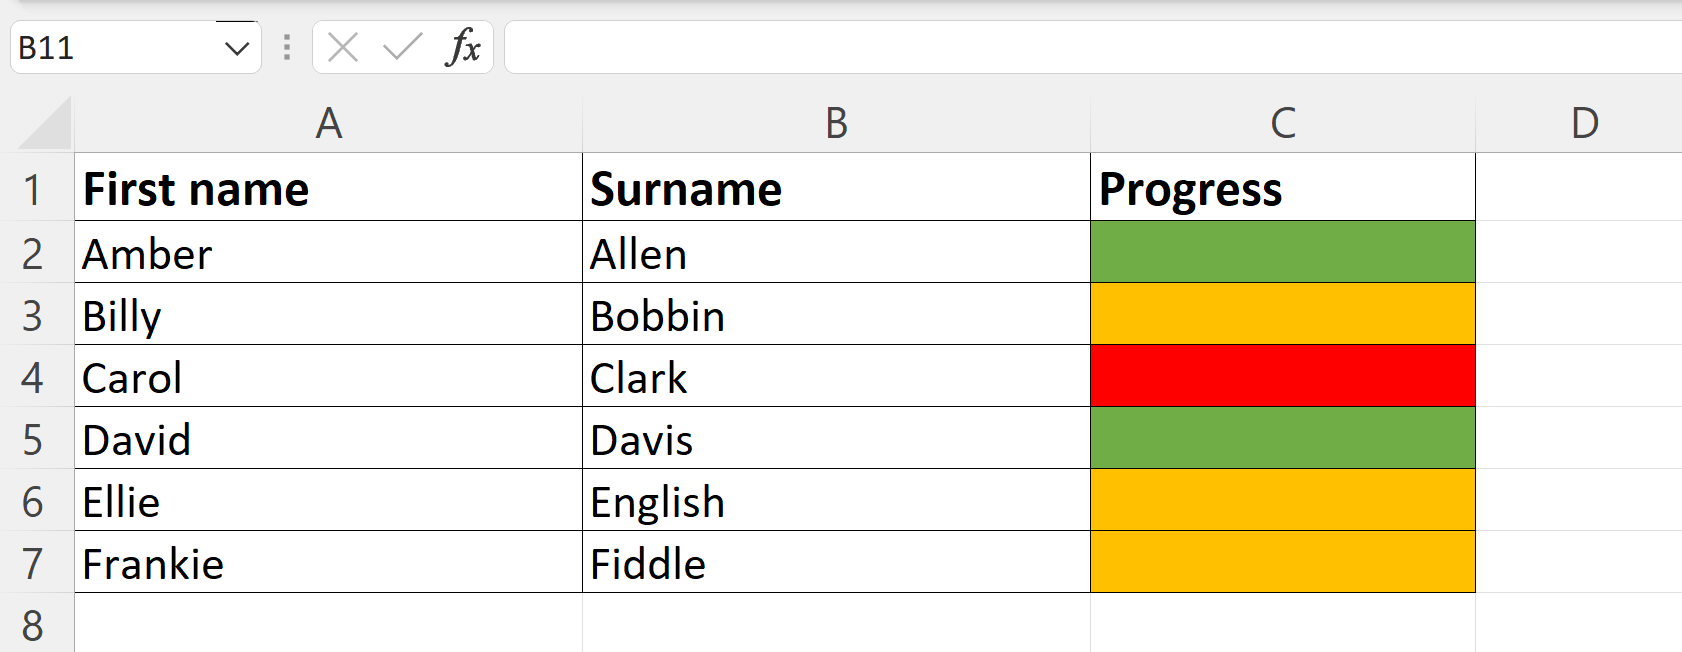 Excel spreadsheet with 6 people and their progress shown with red, orange and green bars but no text